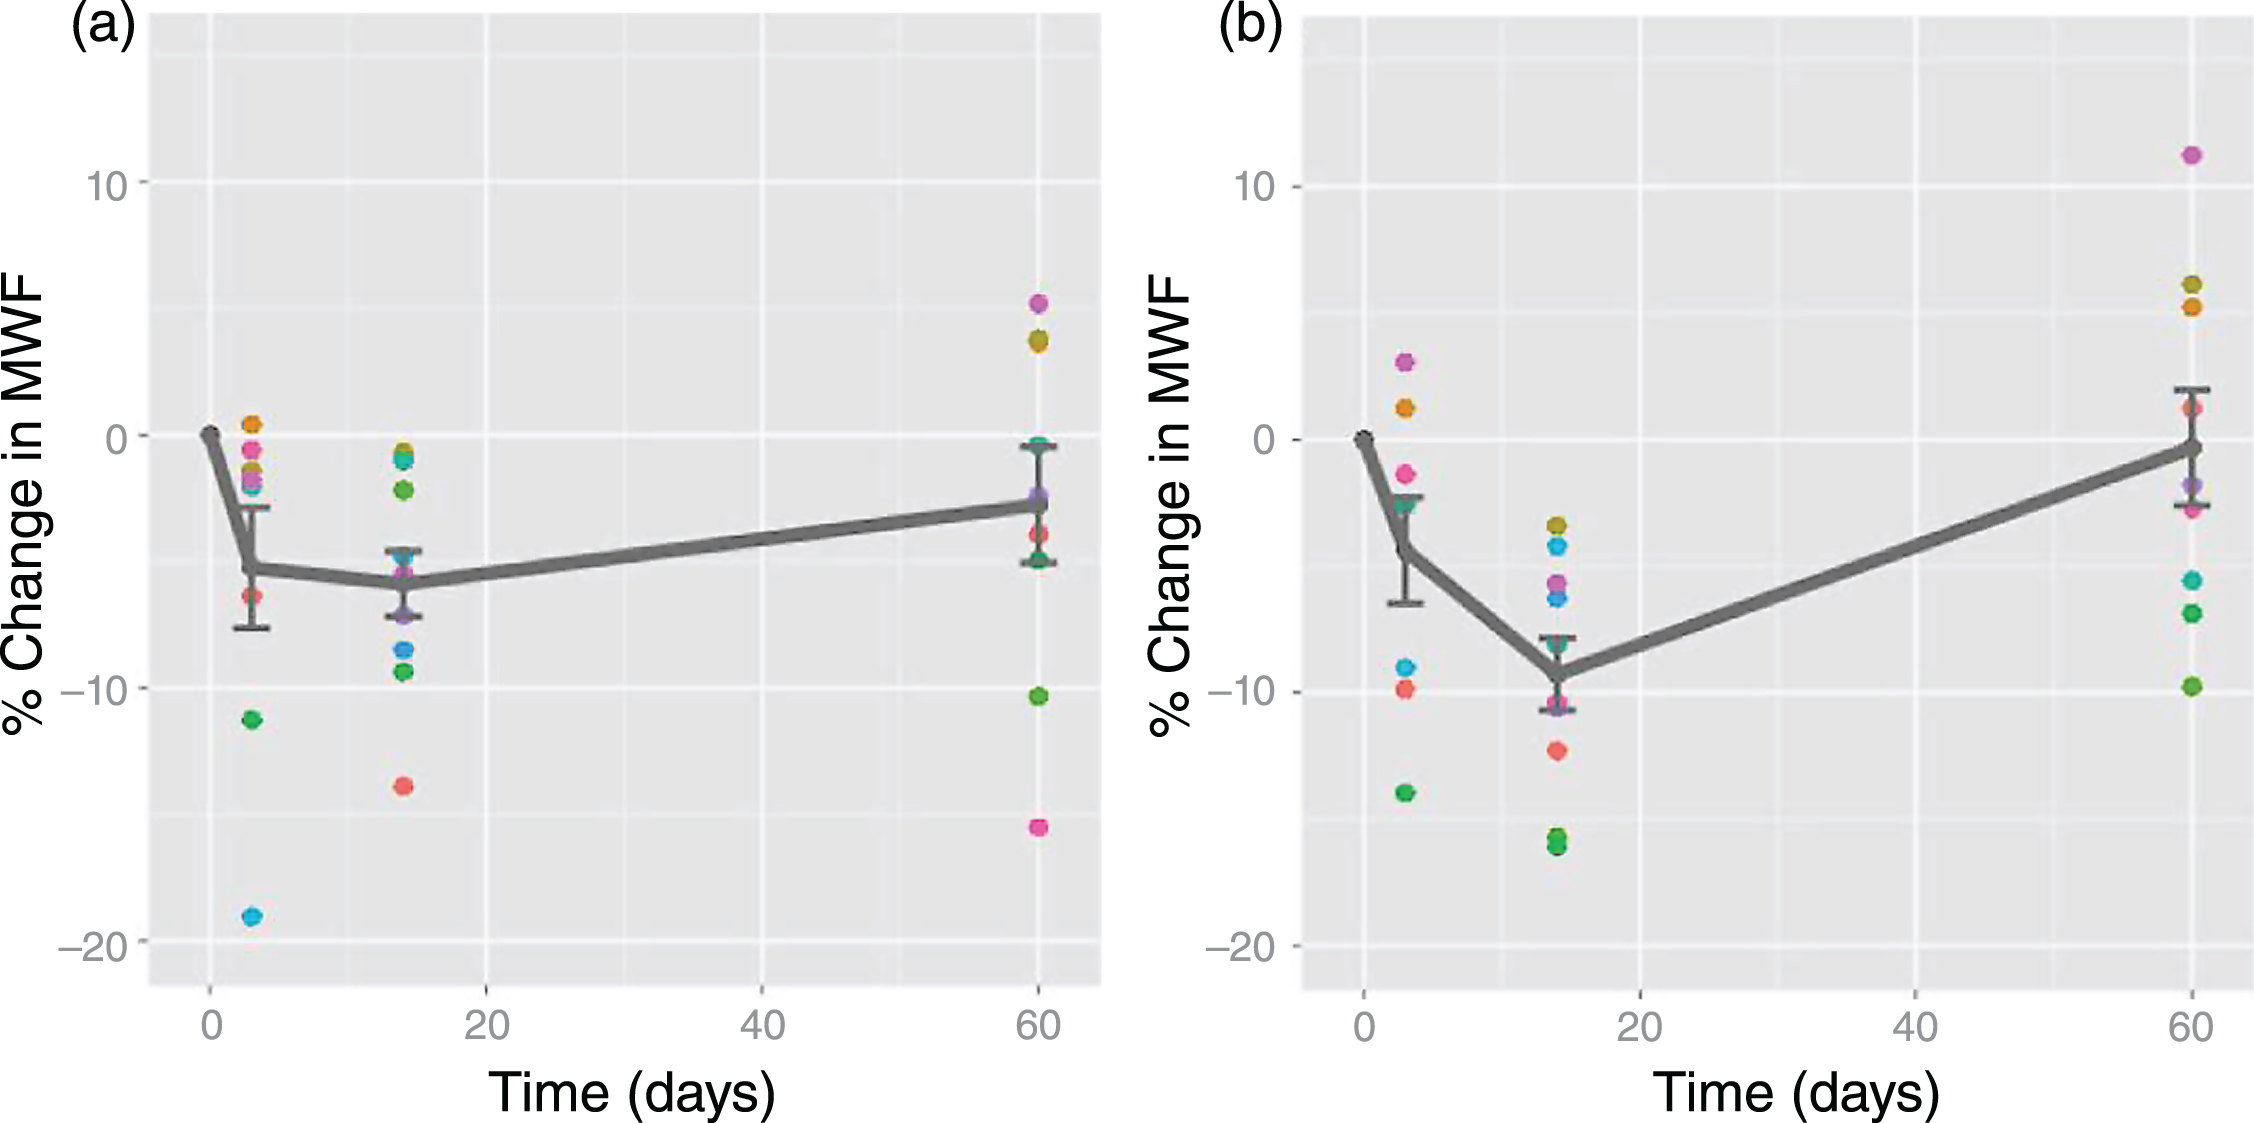 Relative myelin water fraction change post-injury. Change scores for myelin water fraction, relative to baseline, plotted against time for each subject with a mild traumatic brain injury in all significant voxels A) across the whole brain; B) in the splenium of the corpus callosum (a structure most commonly affected in mild TBI). Dots represent data points for each injured athlete (mean +/–standard error plotted in grey.) Note: time zero refers to baseline (Fig. 2, Wright AD, Jarrett M, Vavasour I, Shahinfard E, Kolind S, van Donkelaar P, et al. Myelin Water Fraction Is Transiently Reduced after a Single Mild Traumatic Brain Injury - A Prospective Cohort Study in Collegiate Hockey Players. PLoS One. 2016;11(2):e0150215).